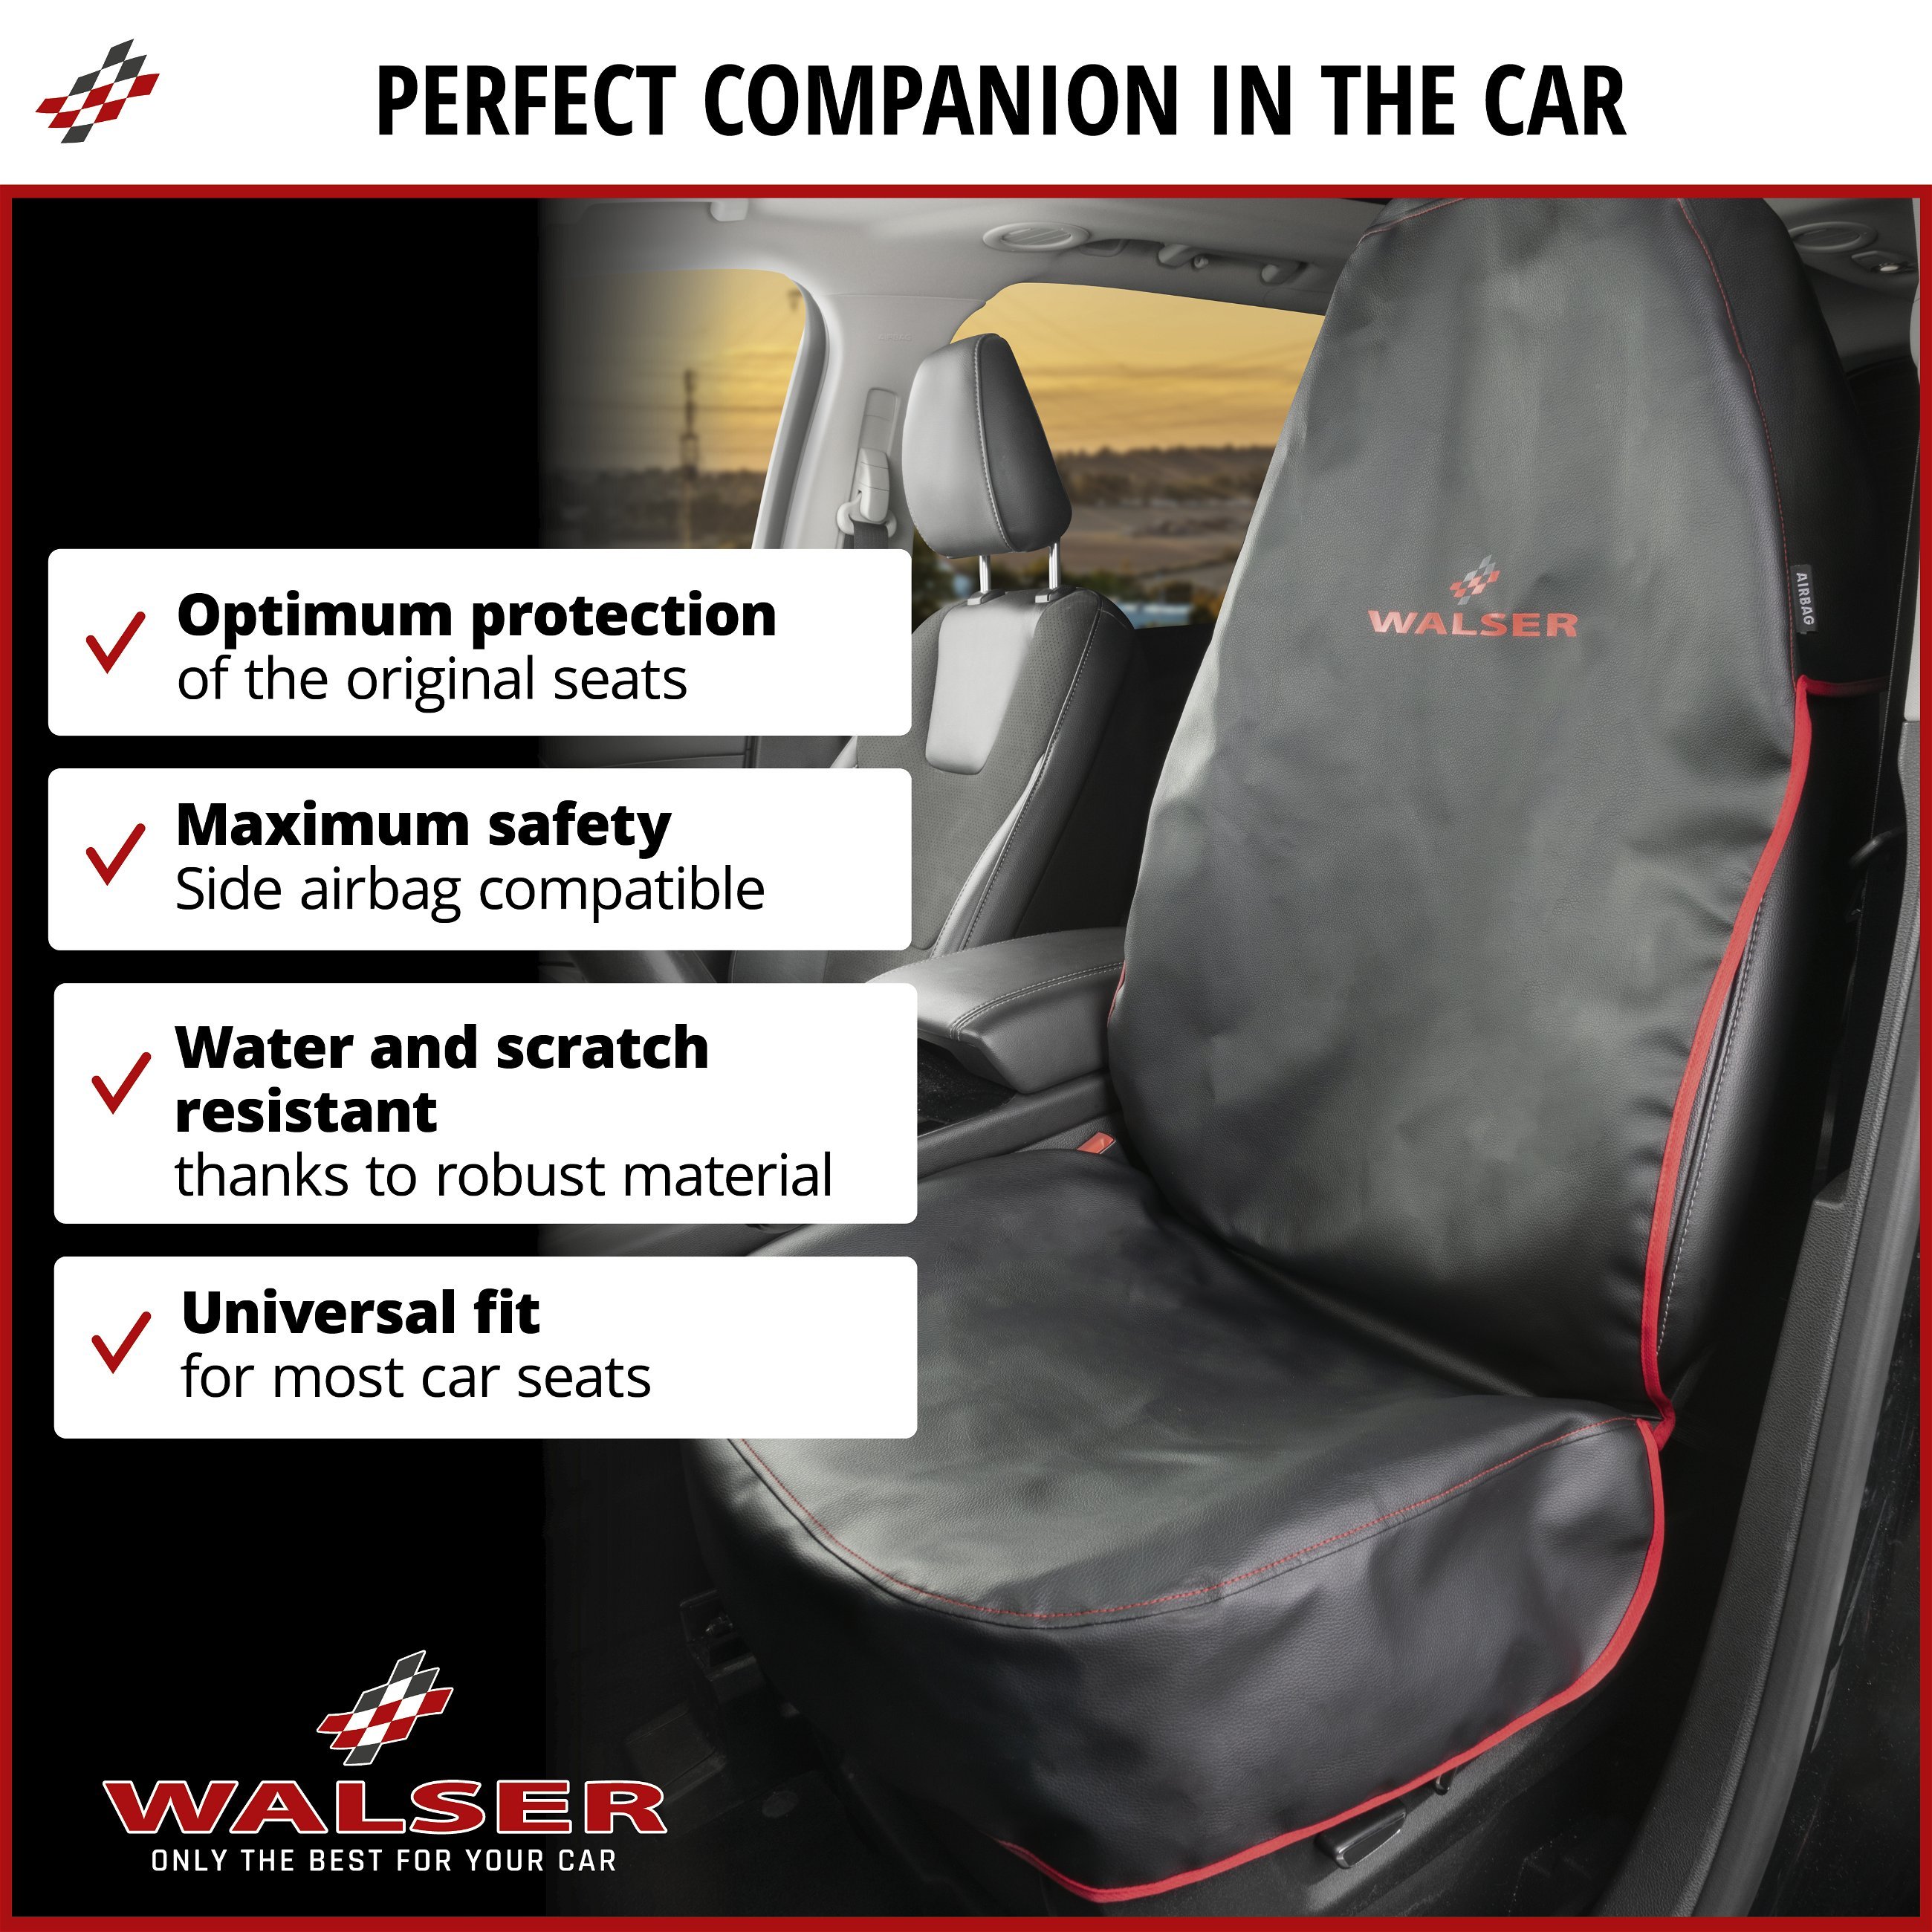 Car seat cover Guardian, front car seat cover, car seat protector black/red  | Cloth Seat covers | Car Seat covers | Seat covers & Cushions | Walser  Online Shop